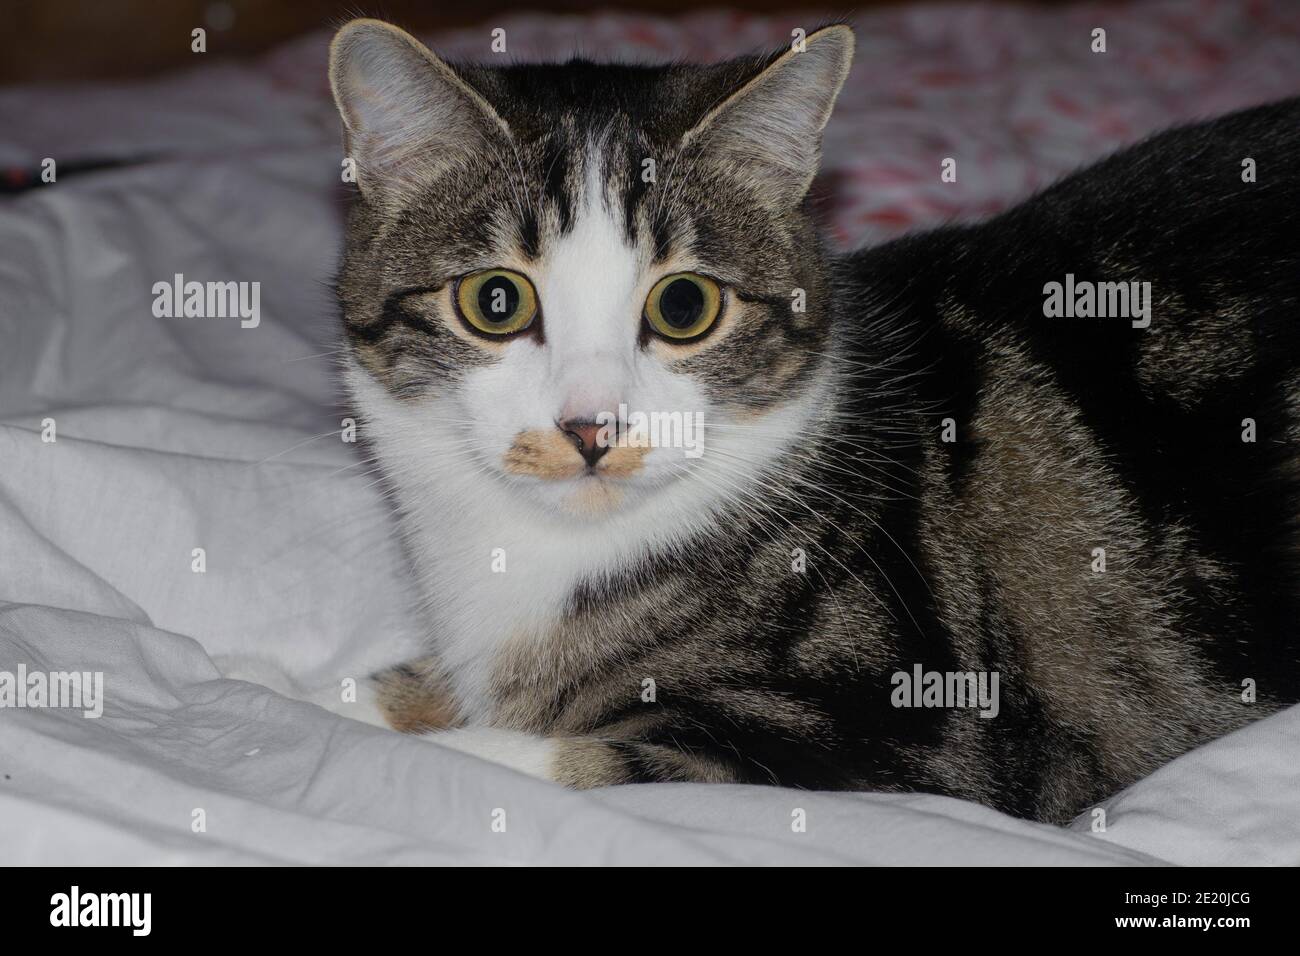 portrait of a tabby cat with big yellow eyes lying down on bed Stock Photo